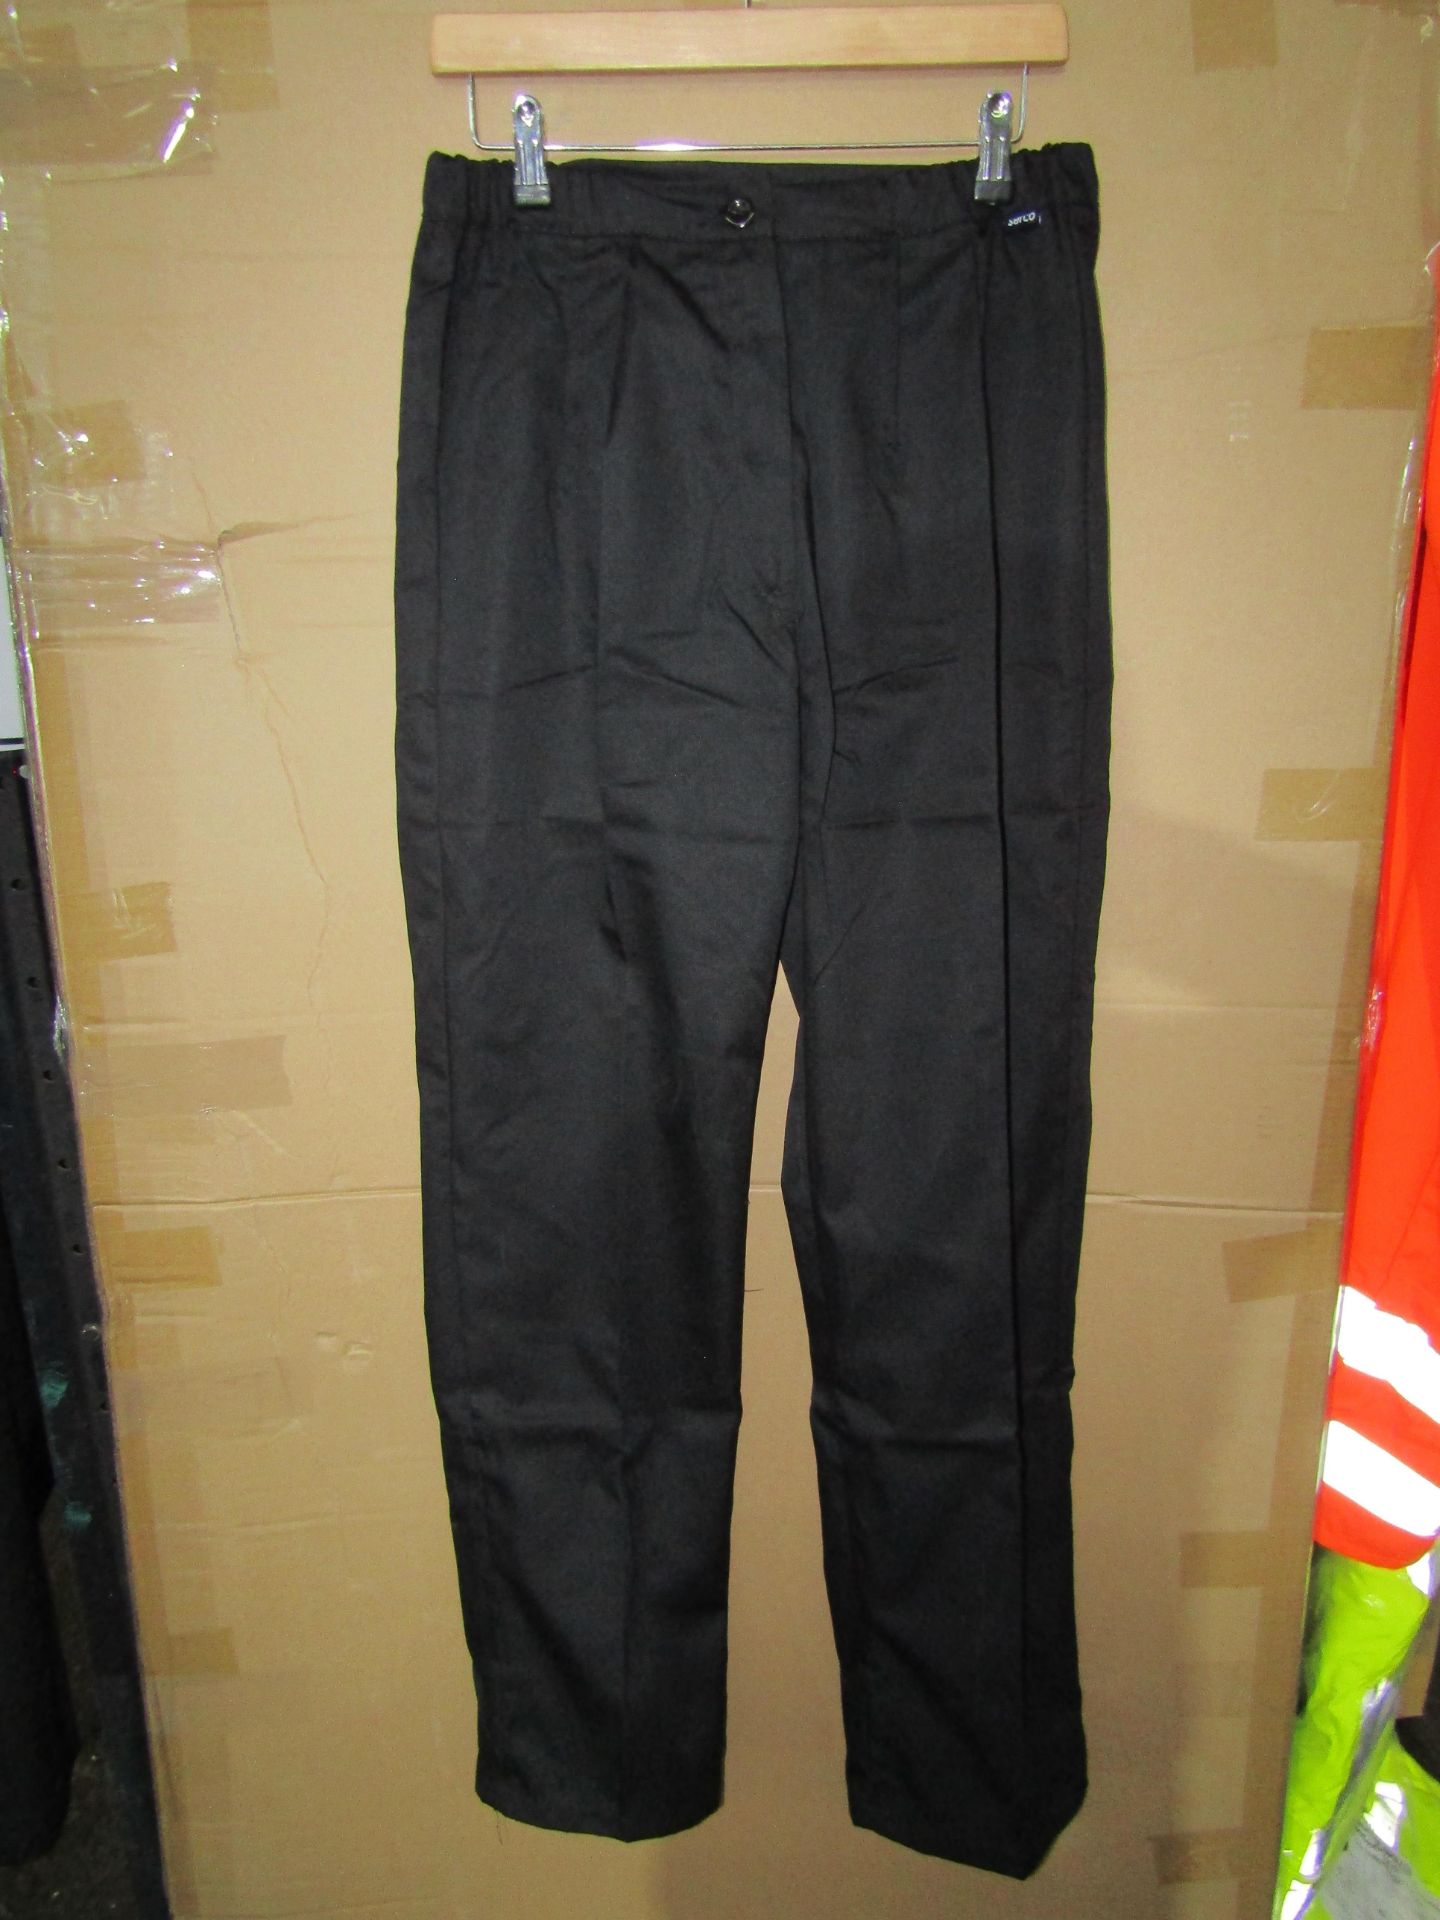 Serco - Ladies poly-cotton Trousers - Black - Size 14 Tall - New & Packaged.